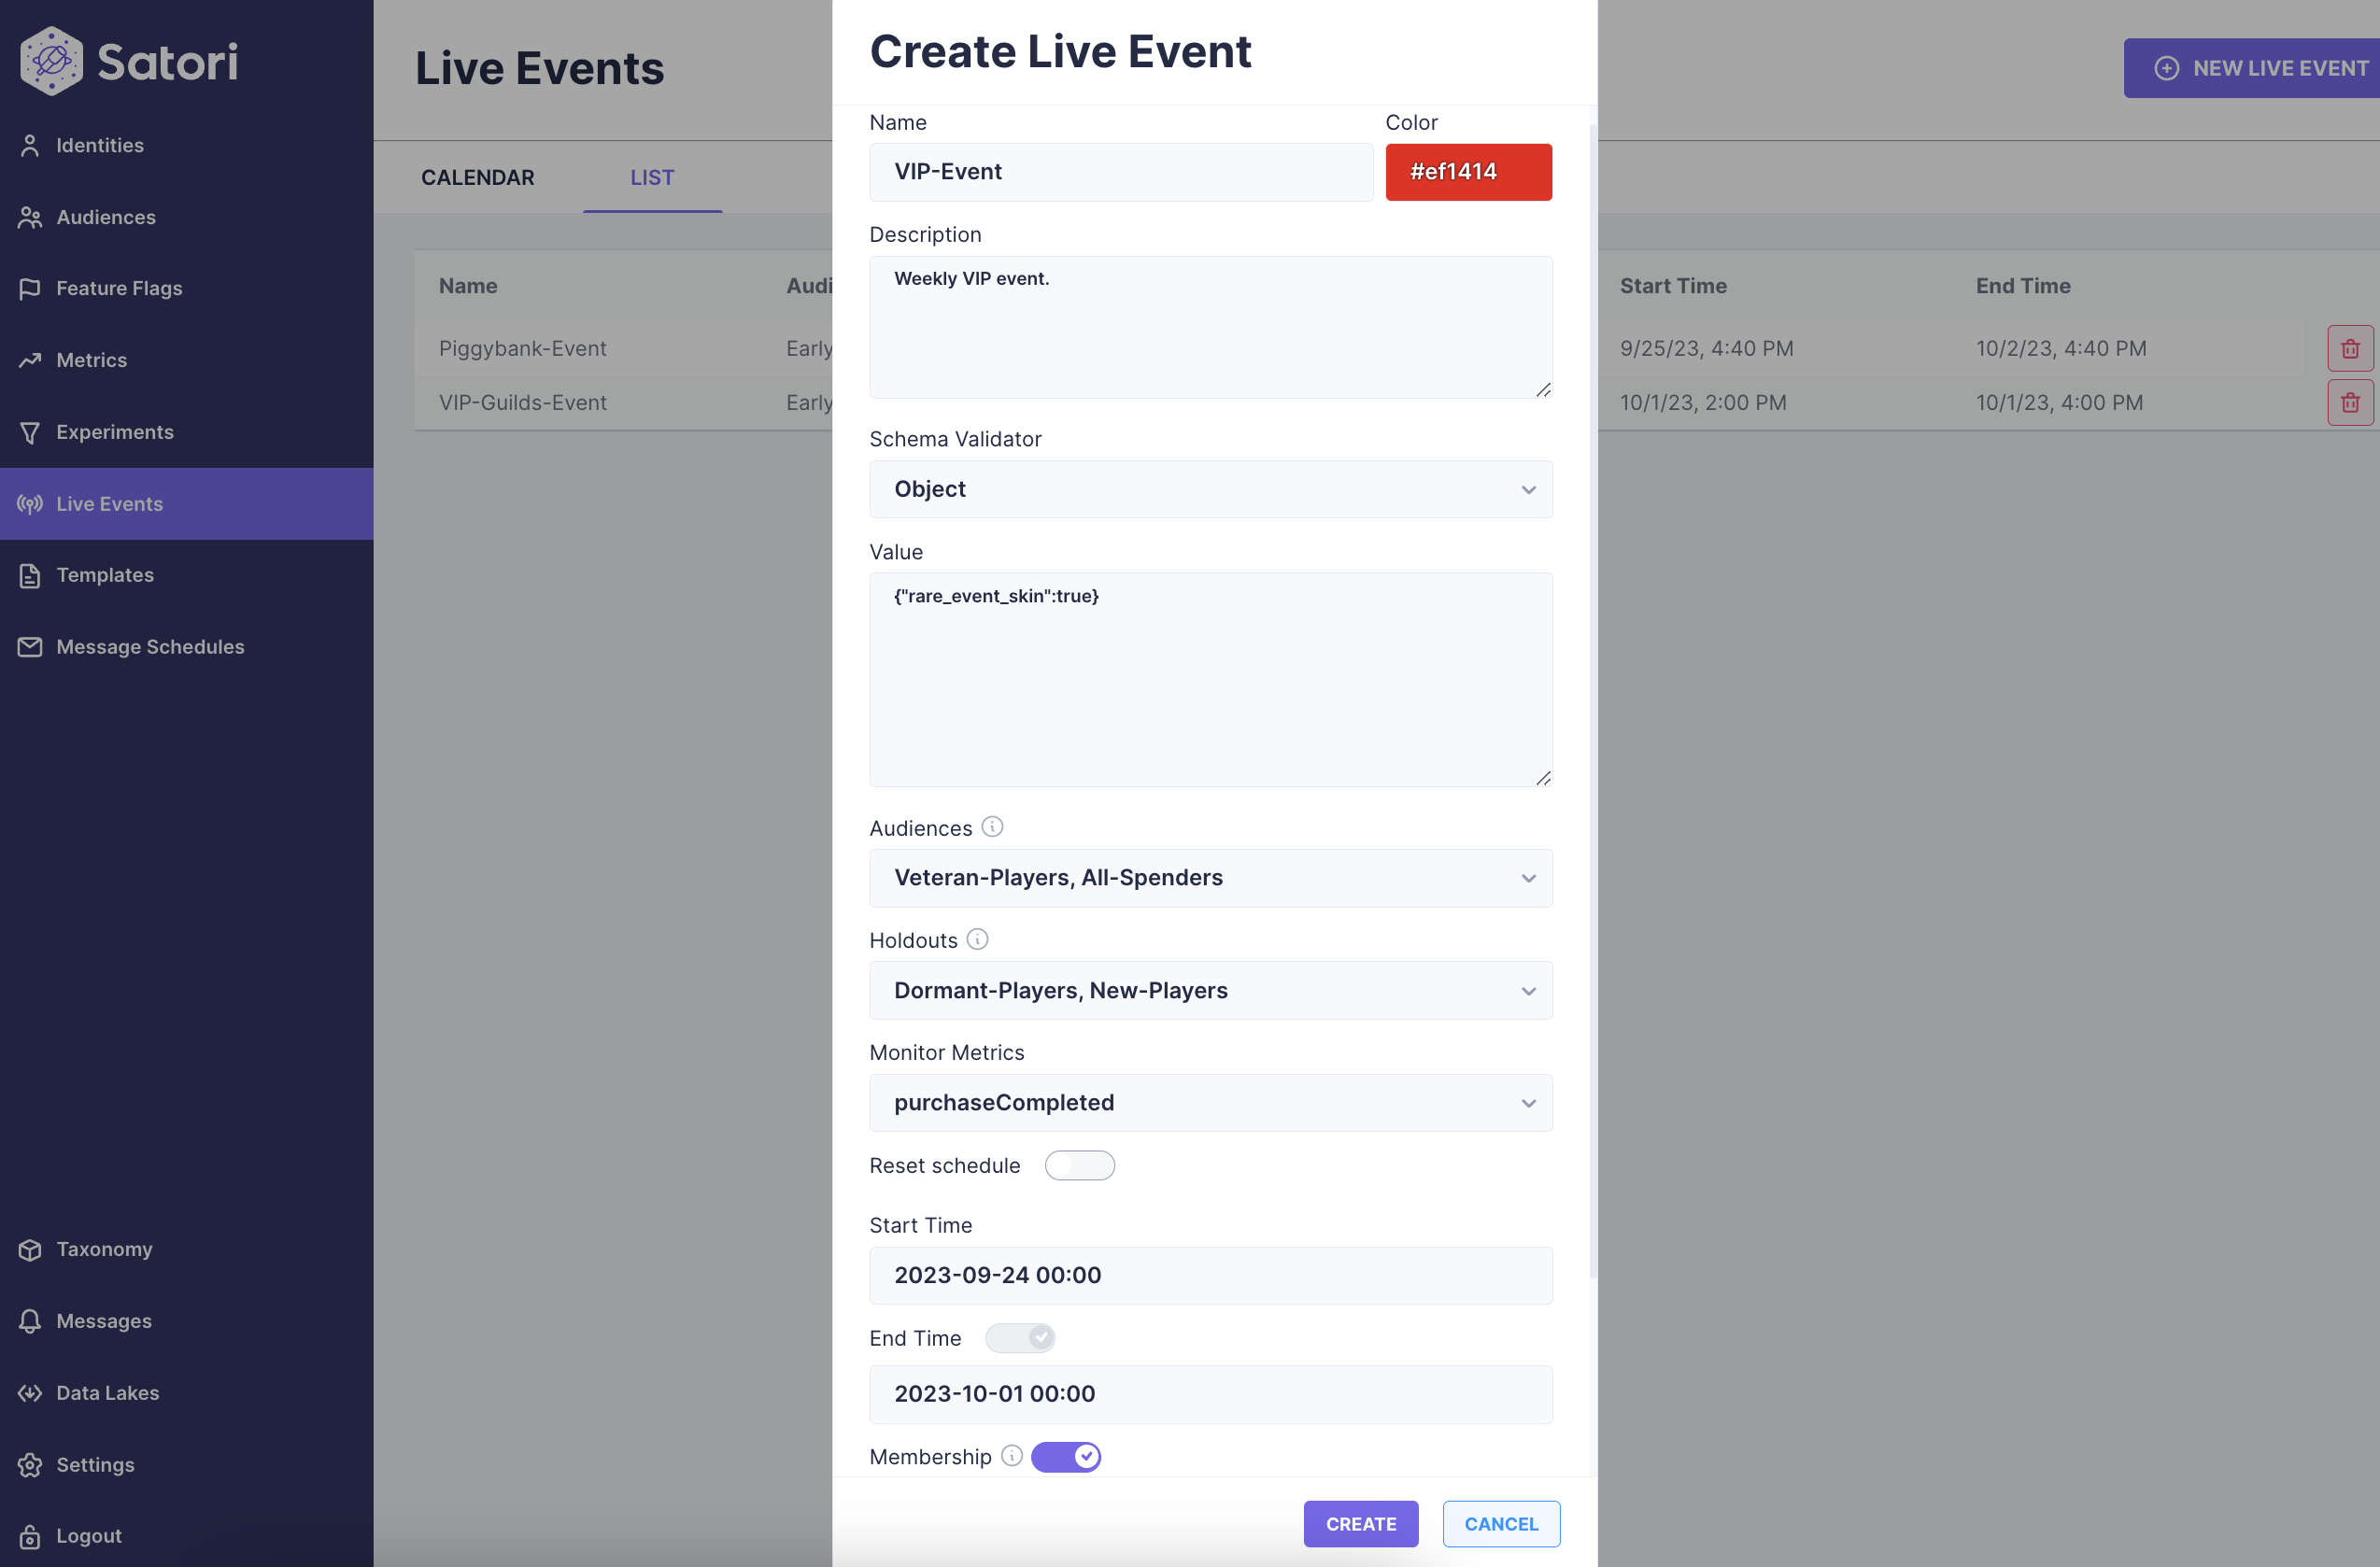 Create a new Live Event